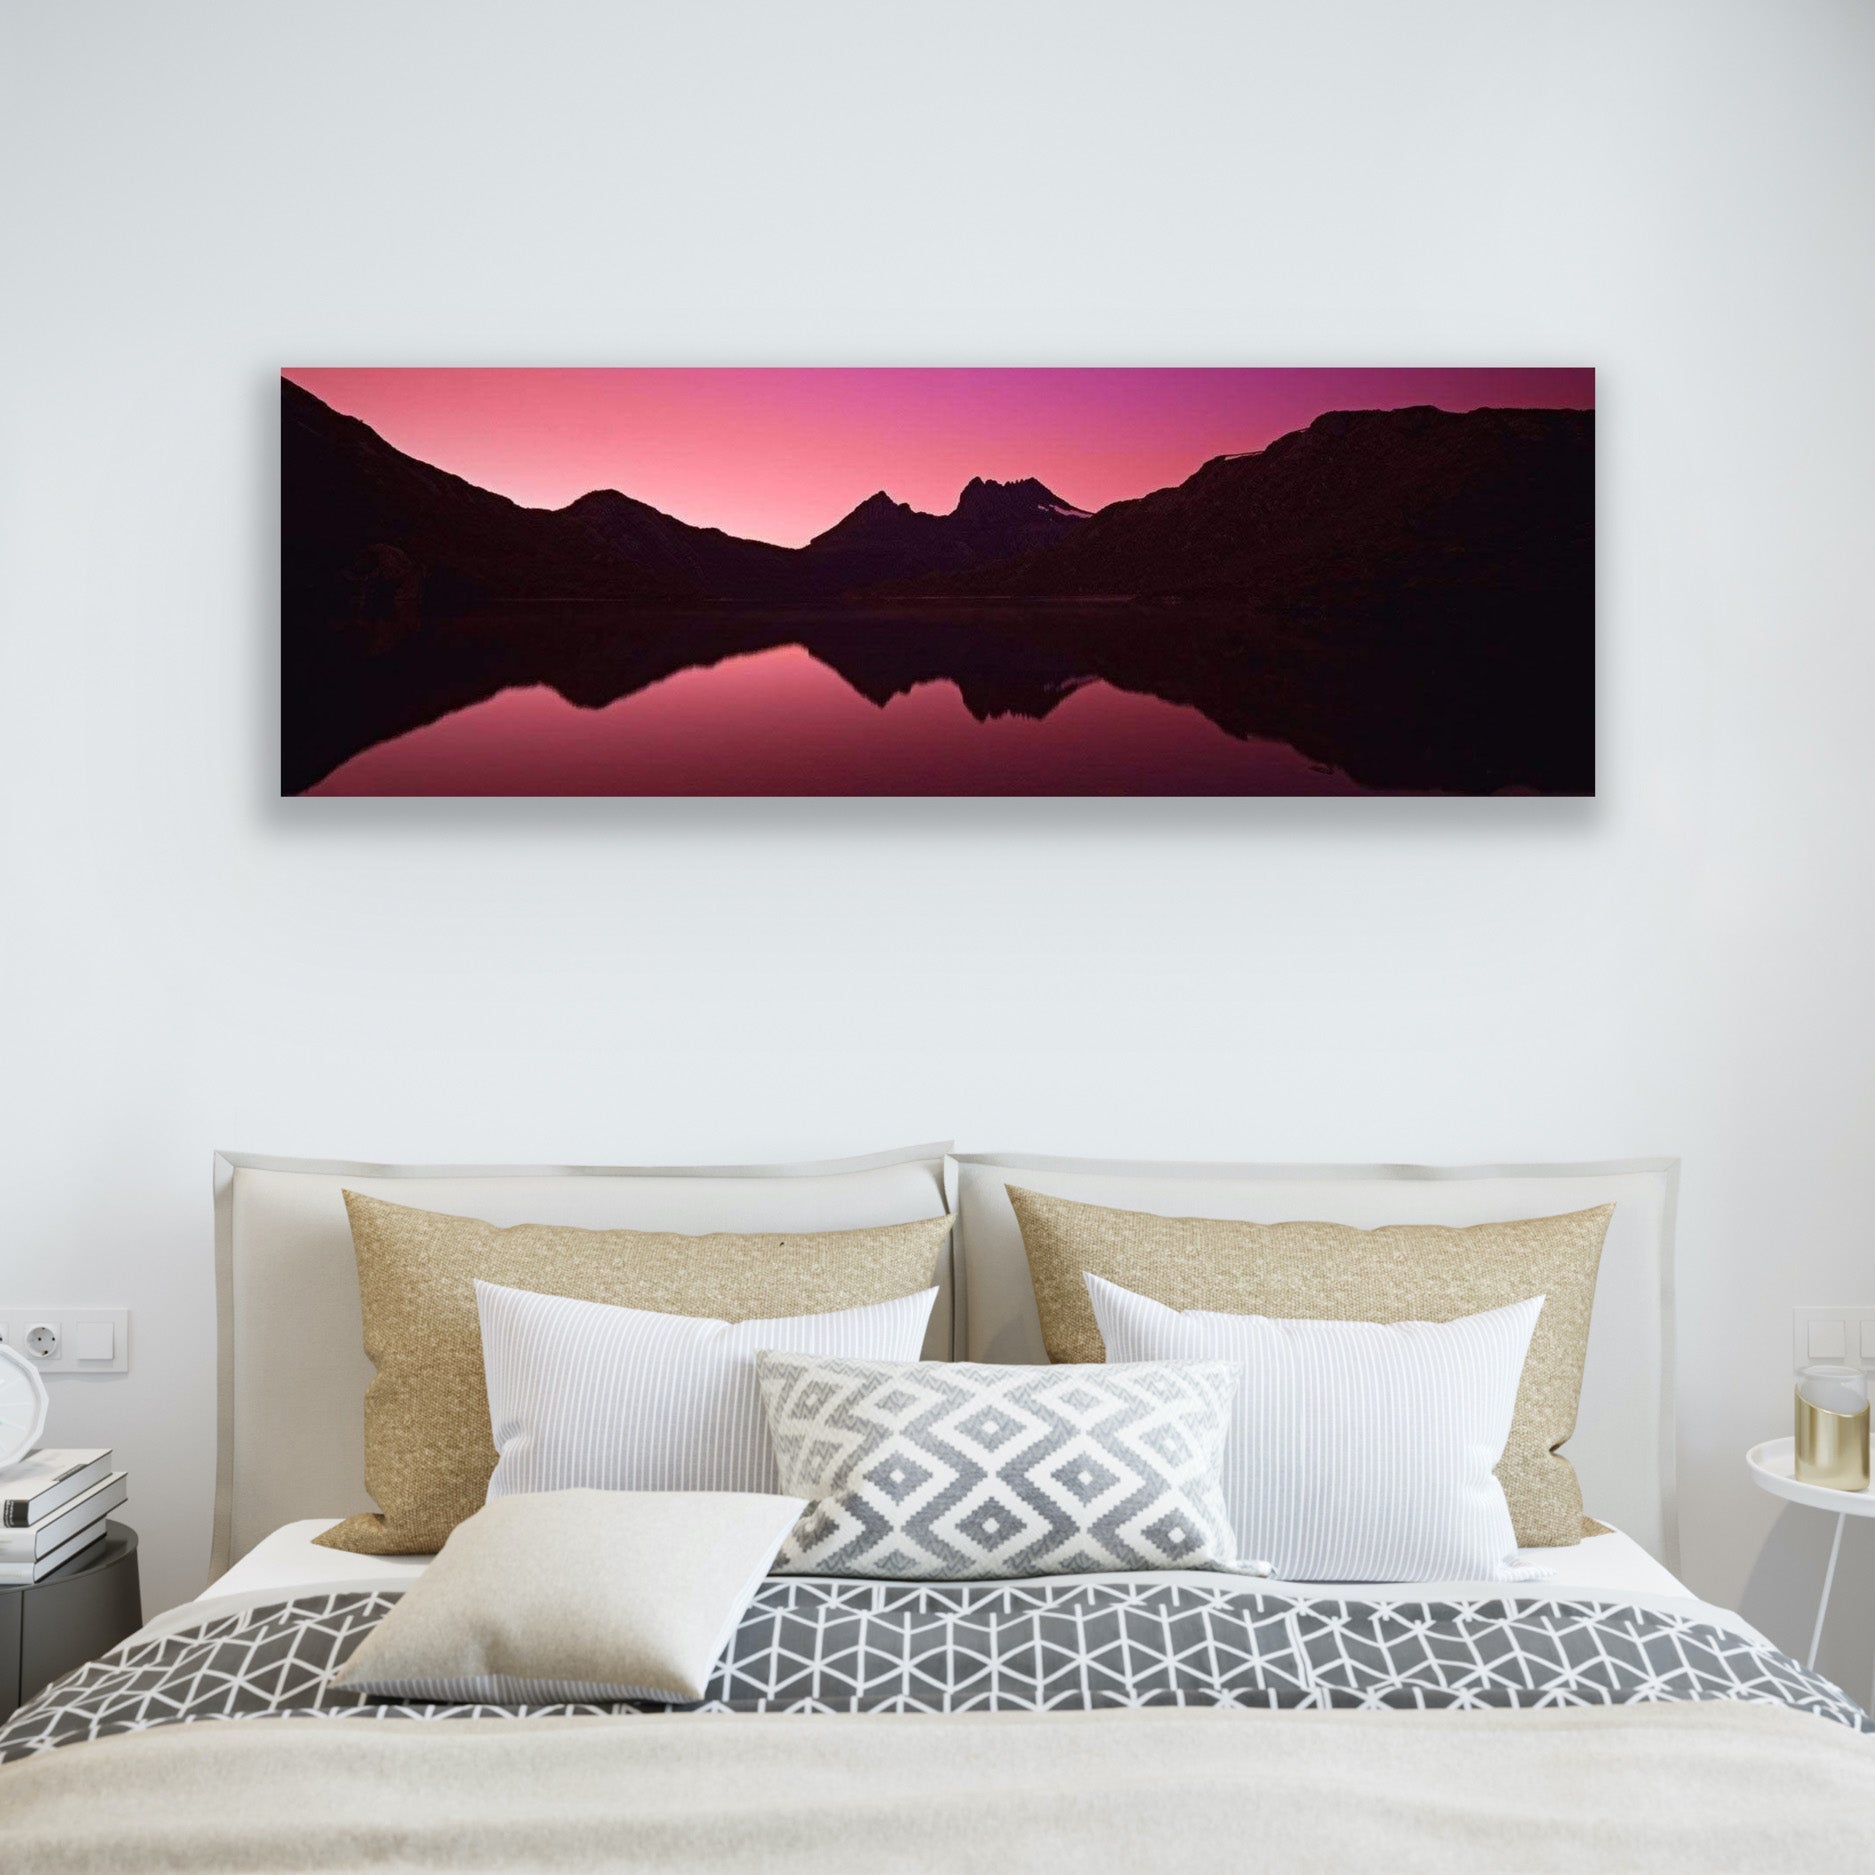 Have an Australian Landscape Icon hanging in your home